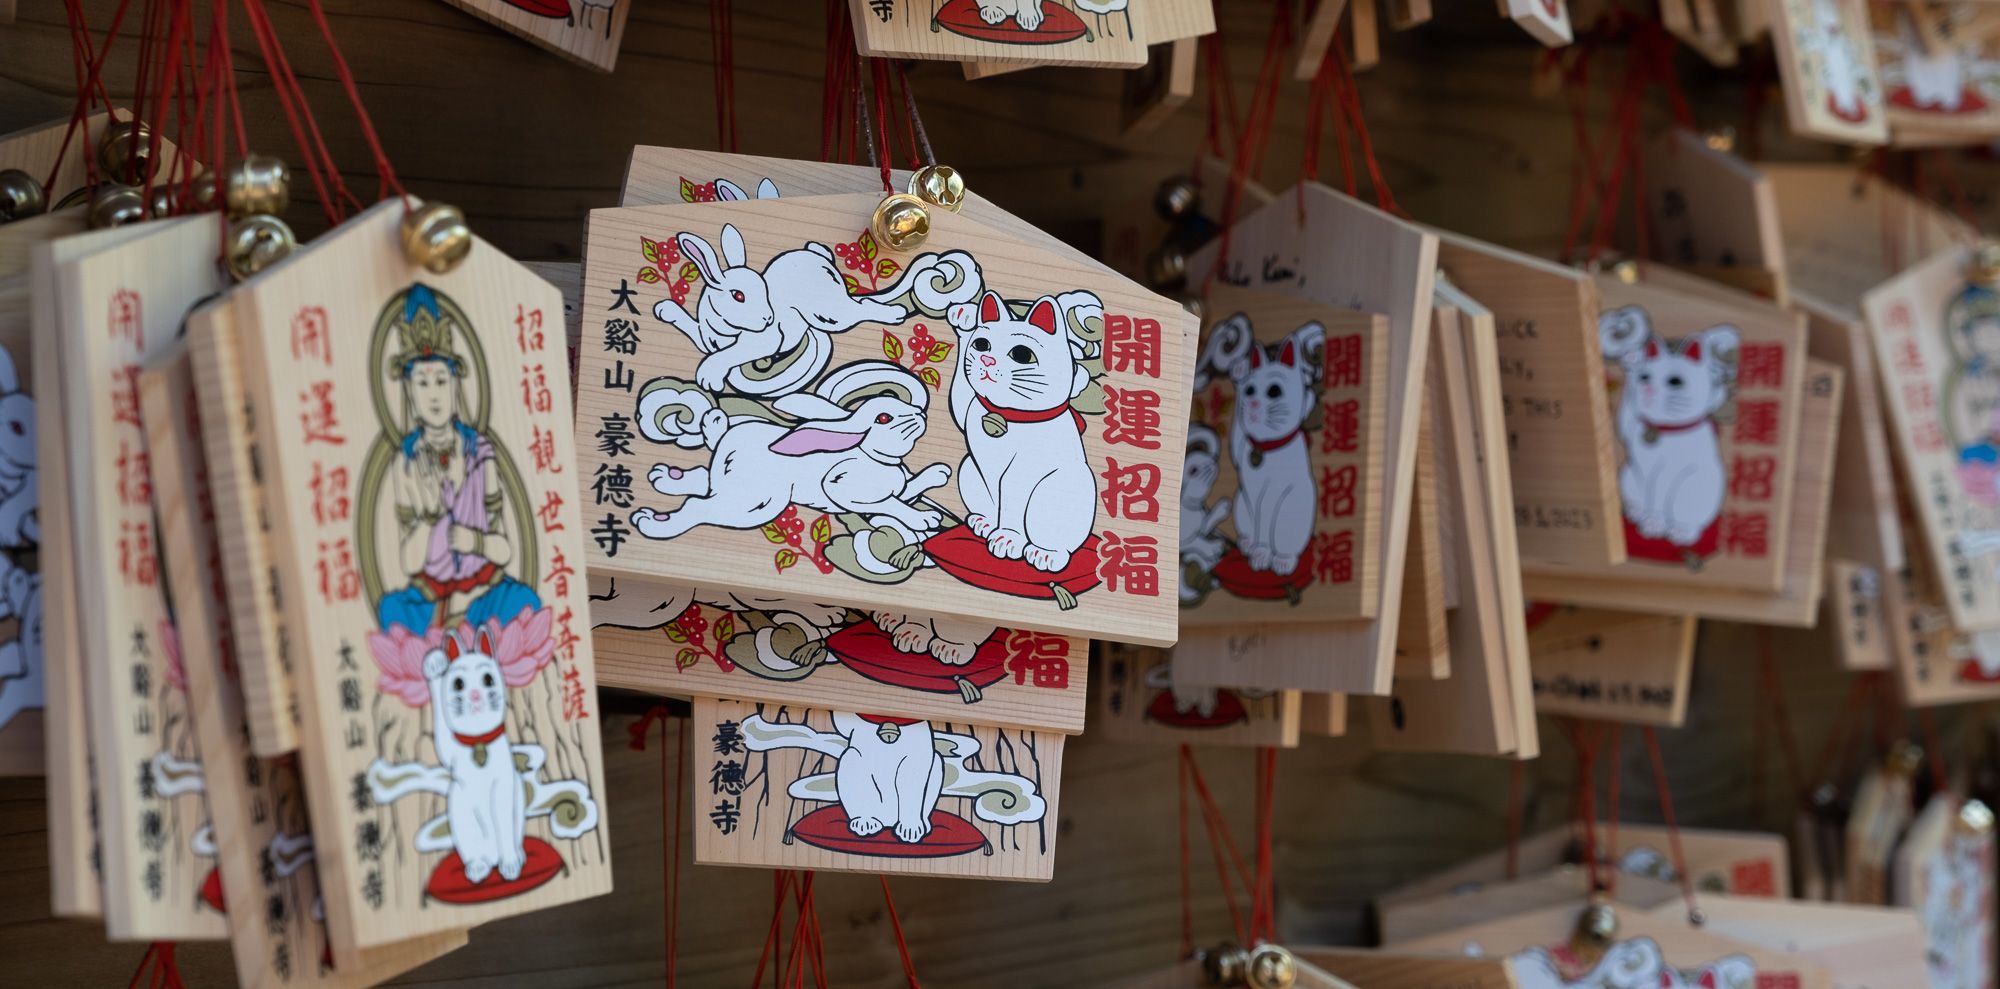 Tokyo's temple of kittens